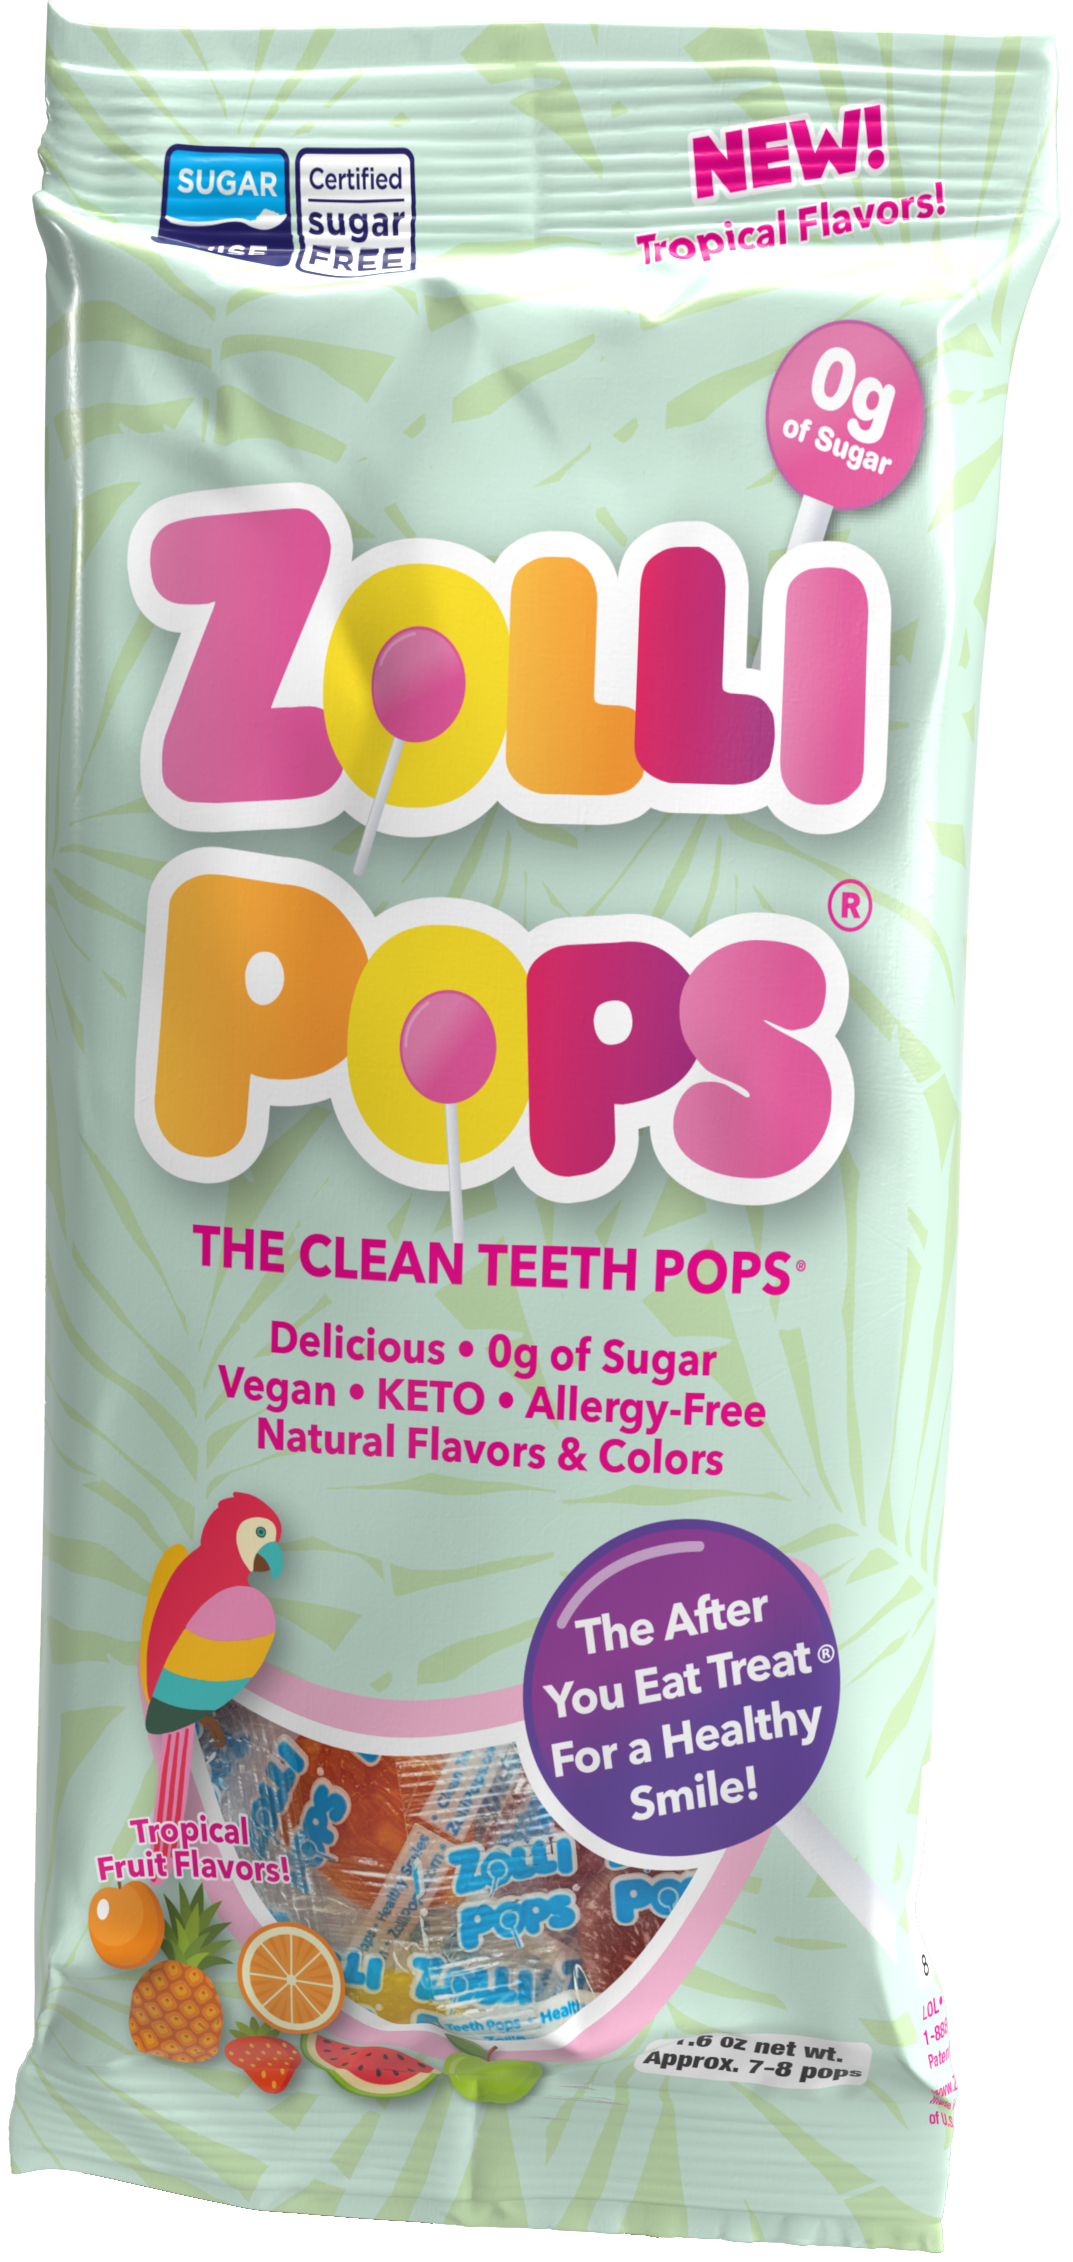 New! Zollipops Tropical - 1.6oz Pouch (12/Display Tray)